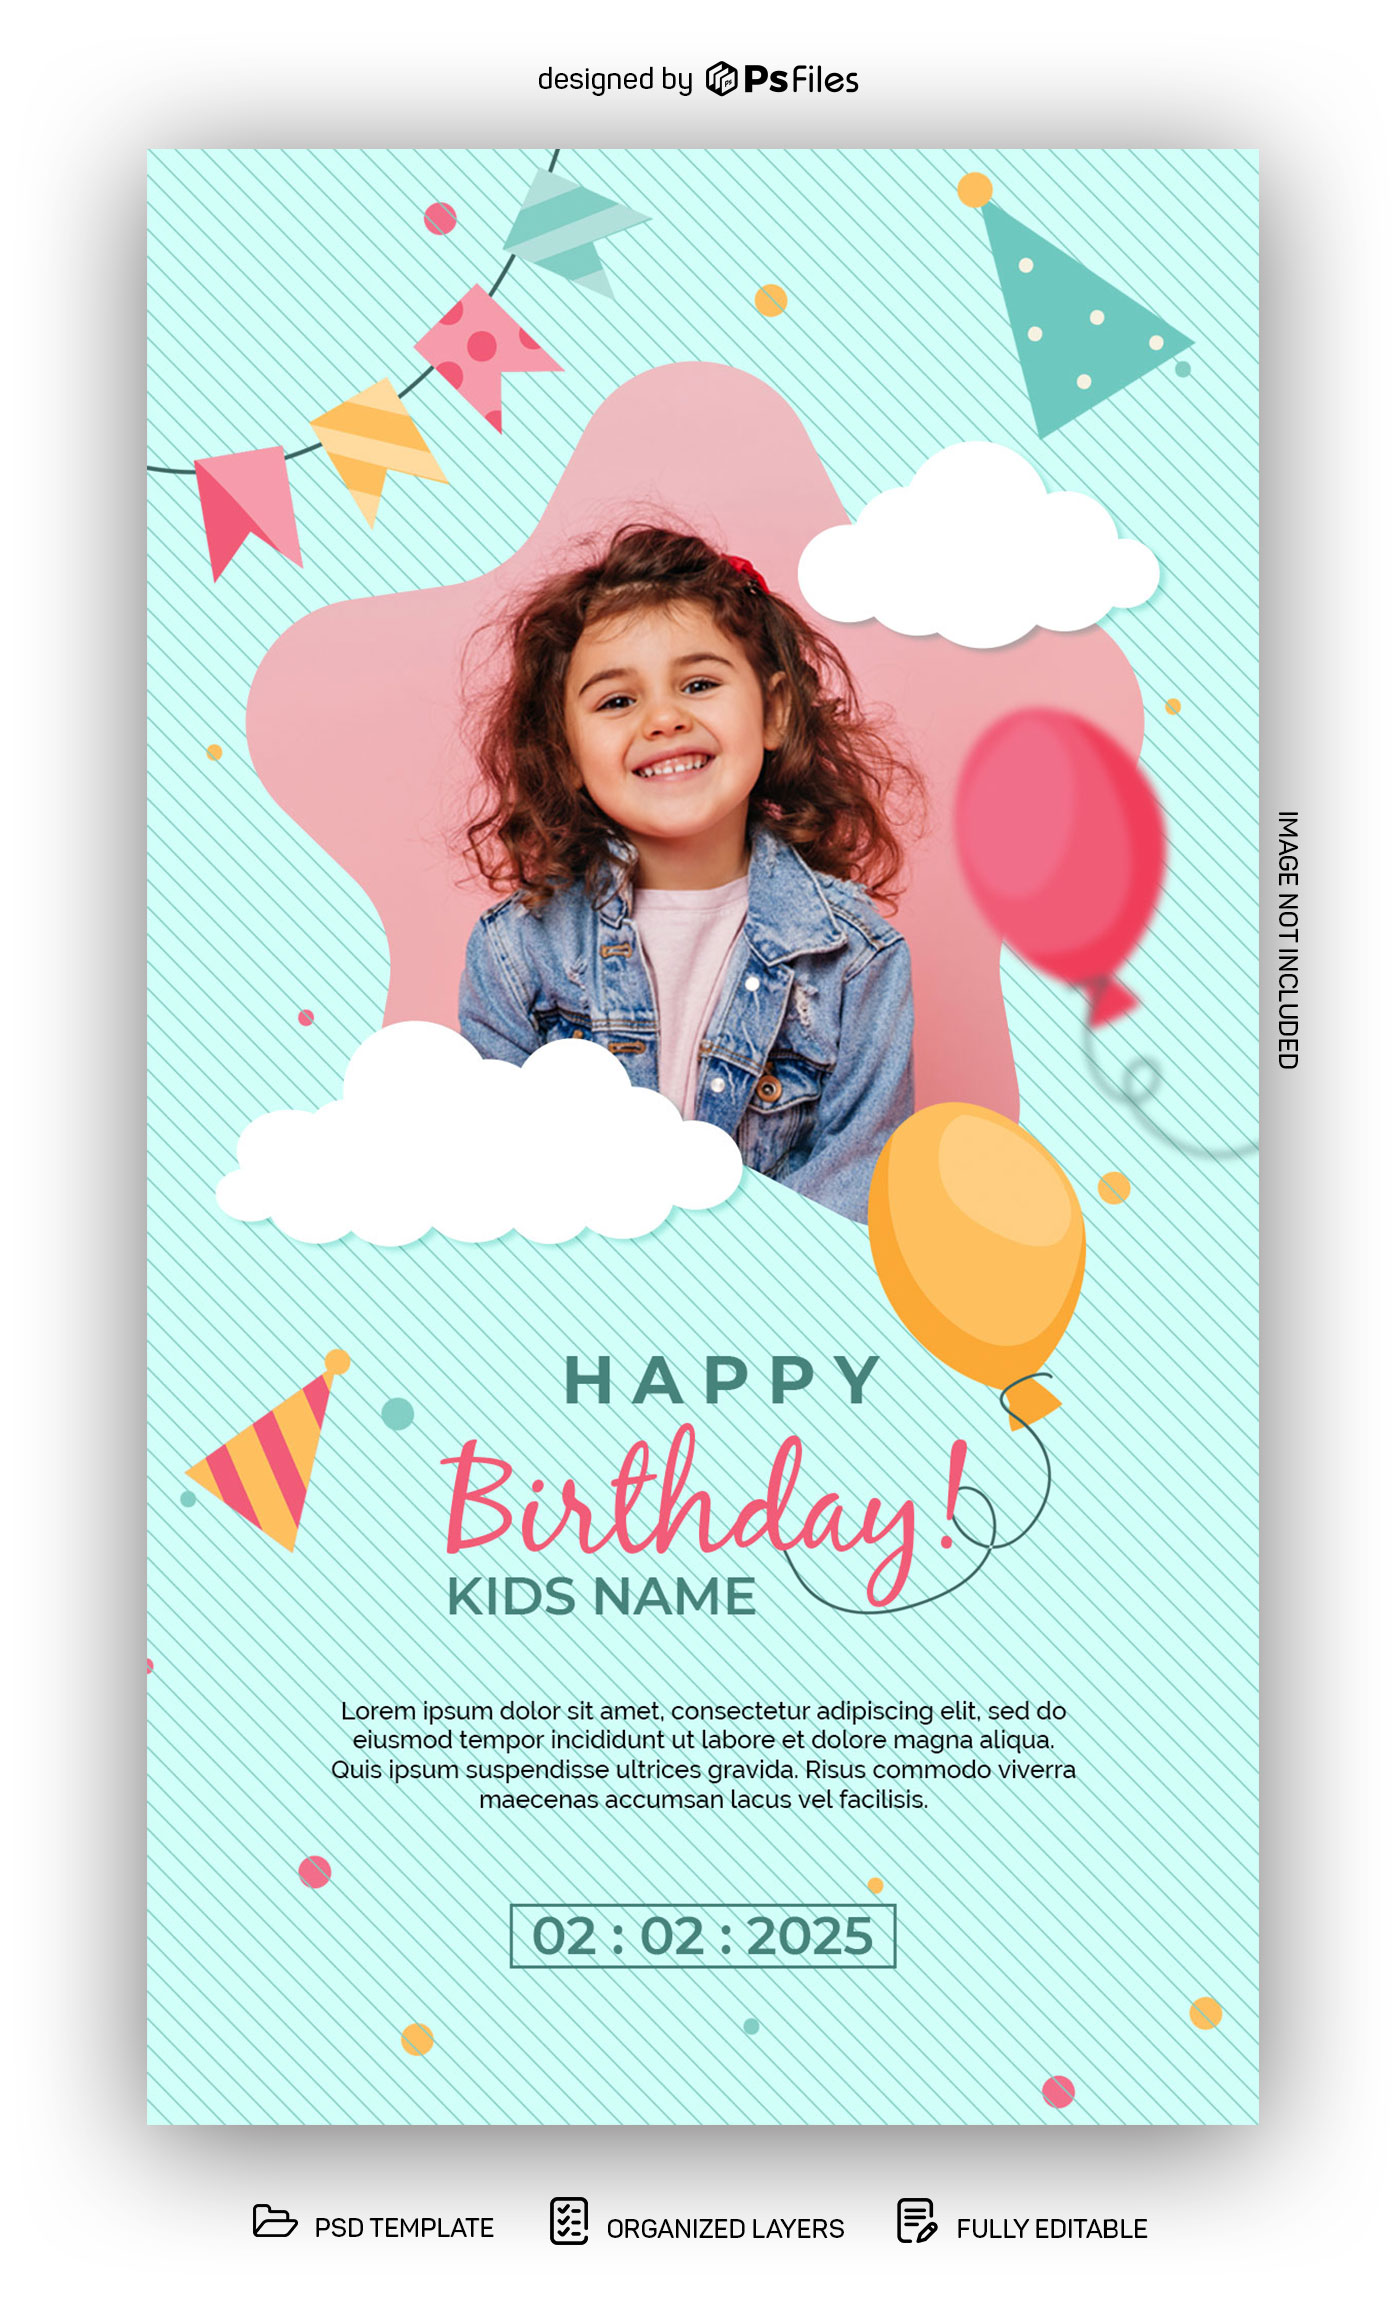  Birthday Invitation Poster Design PSD Template for Free